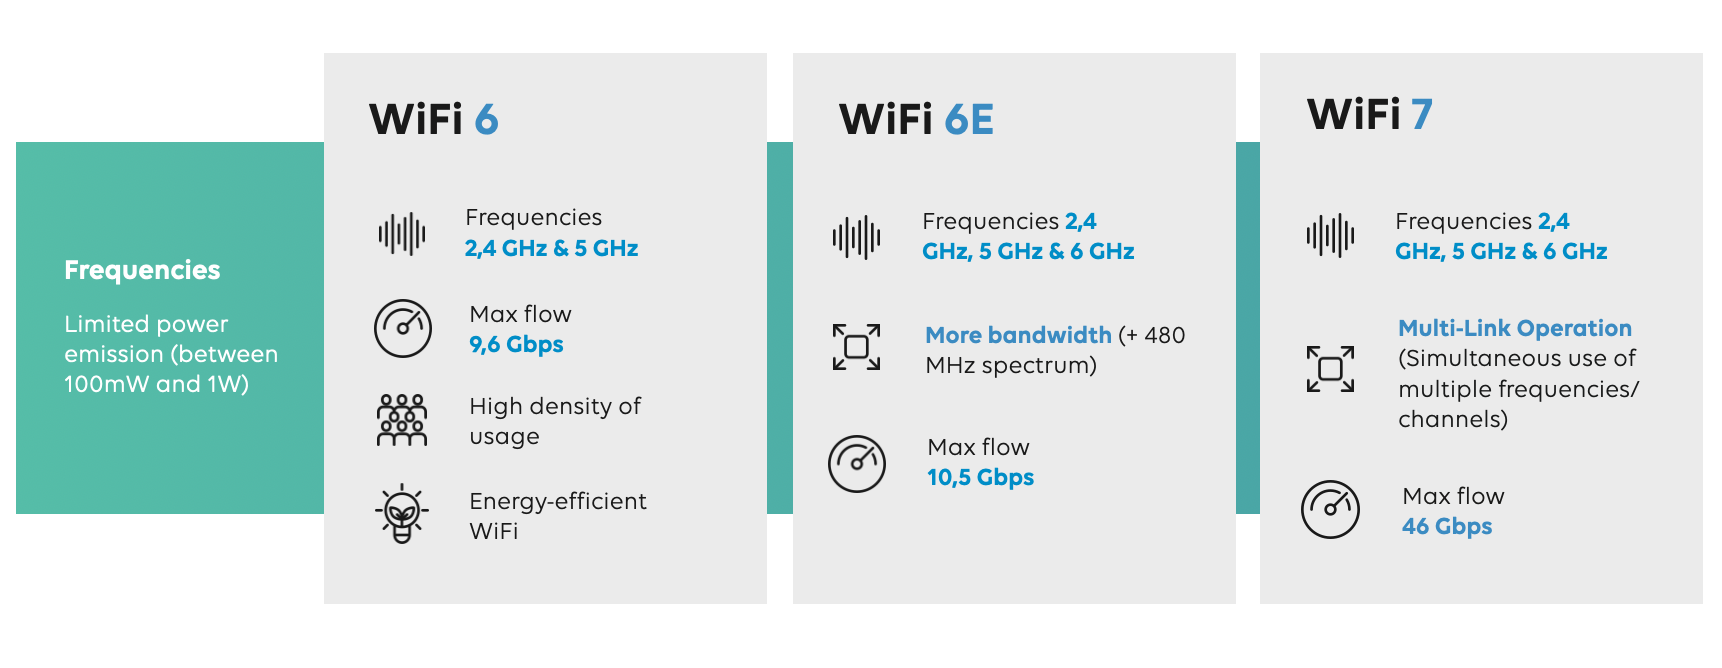 WiFifrequences_ENG